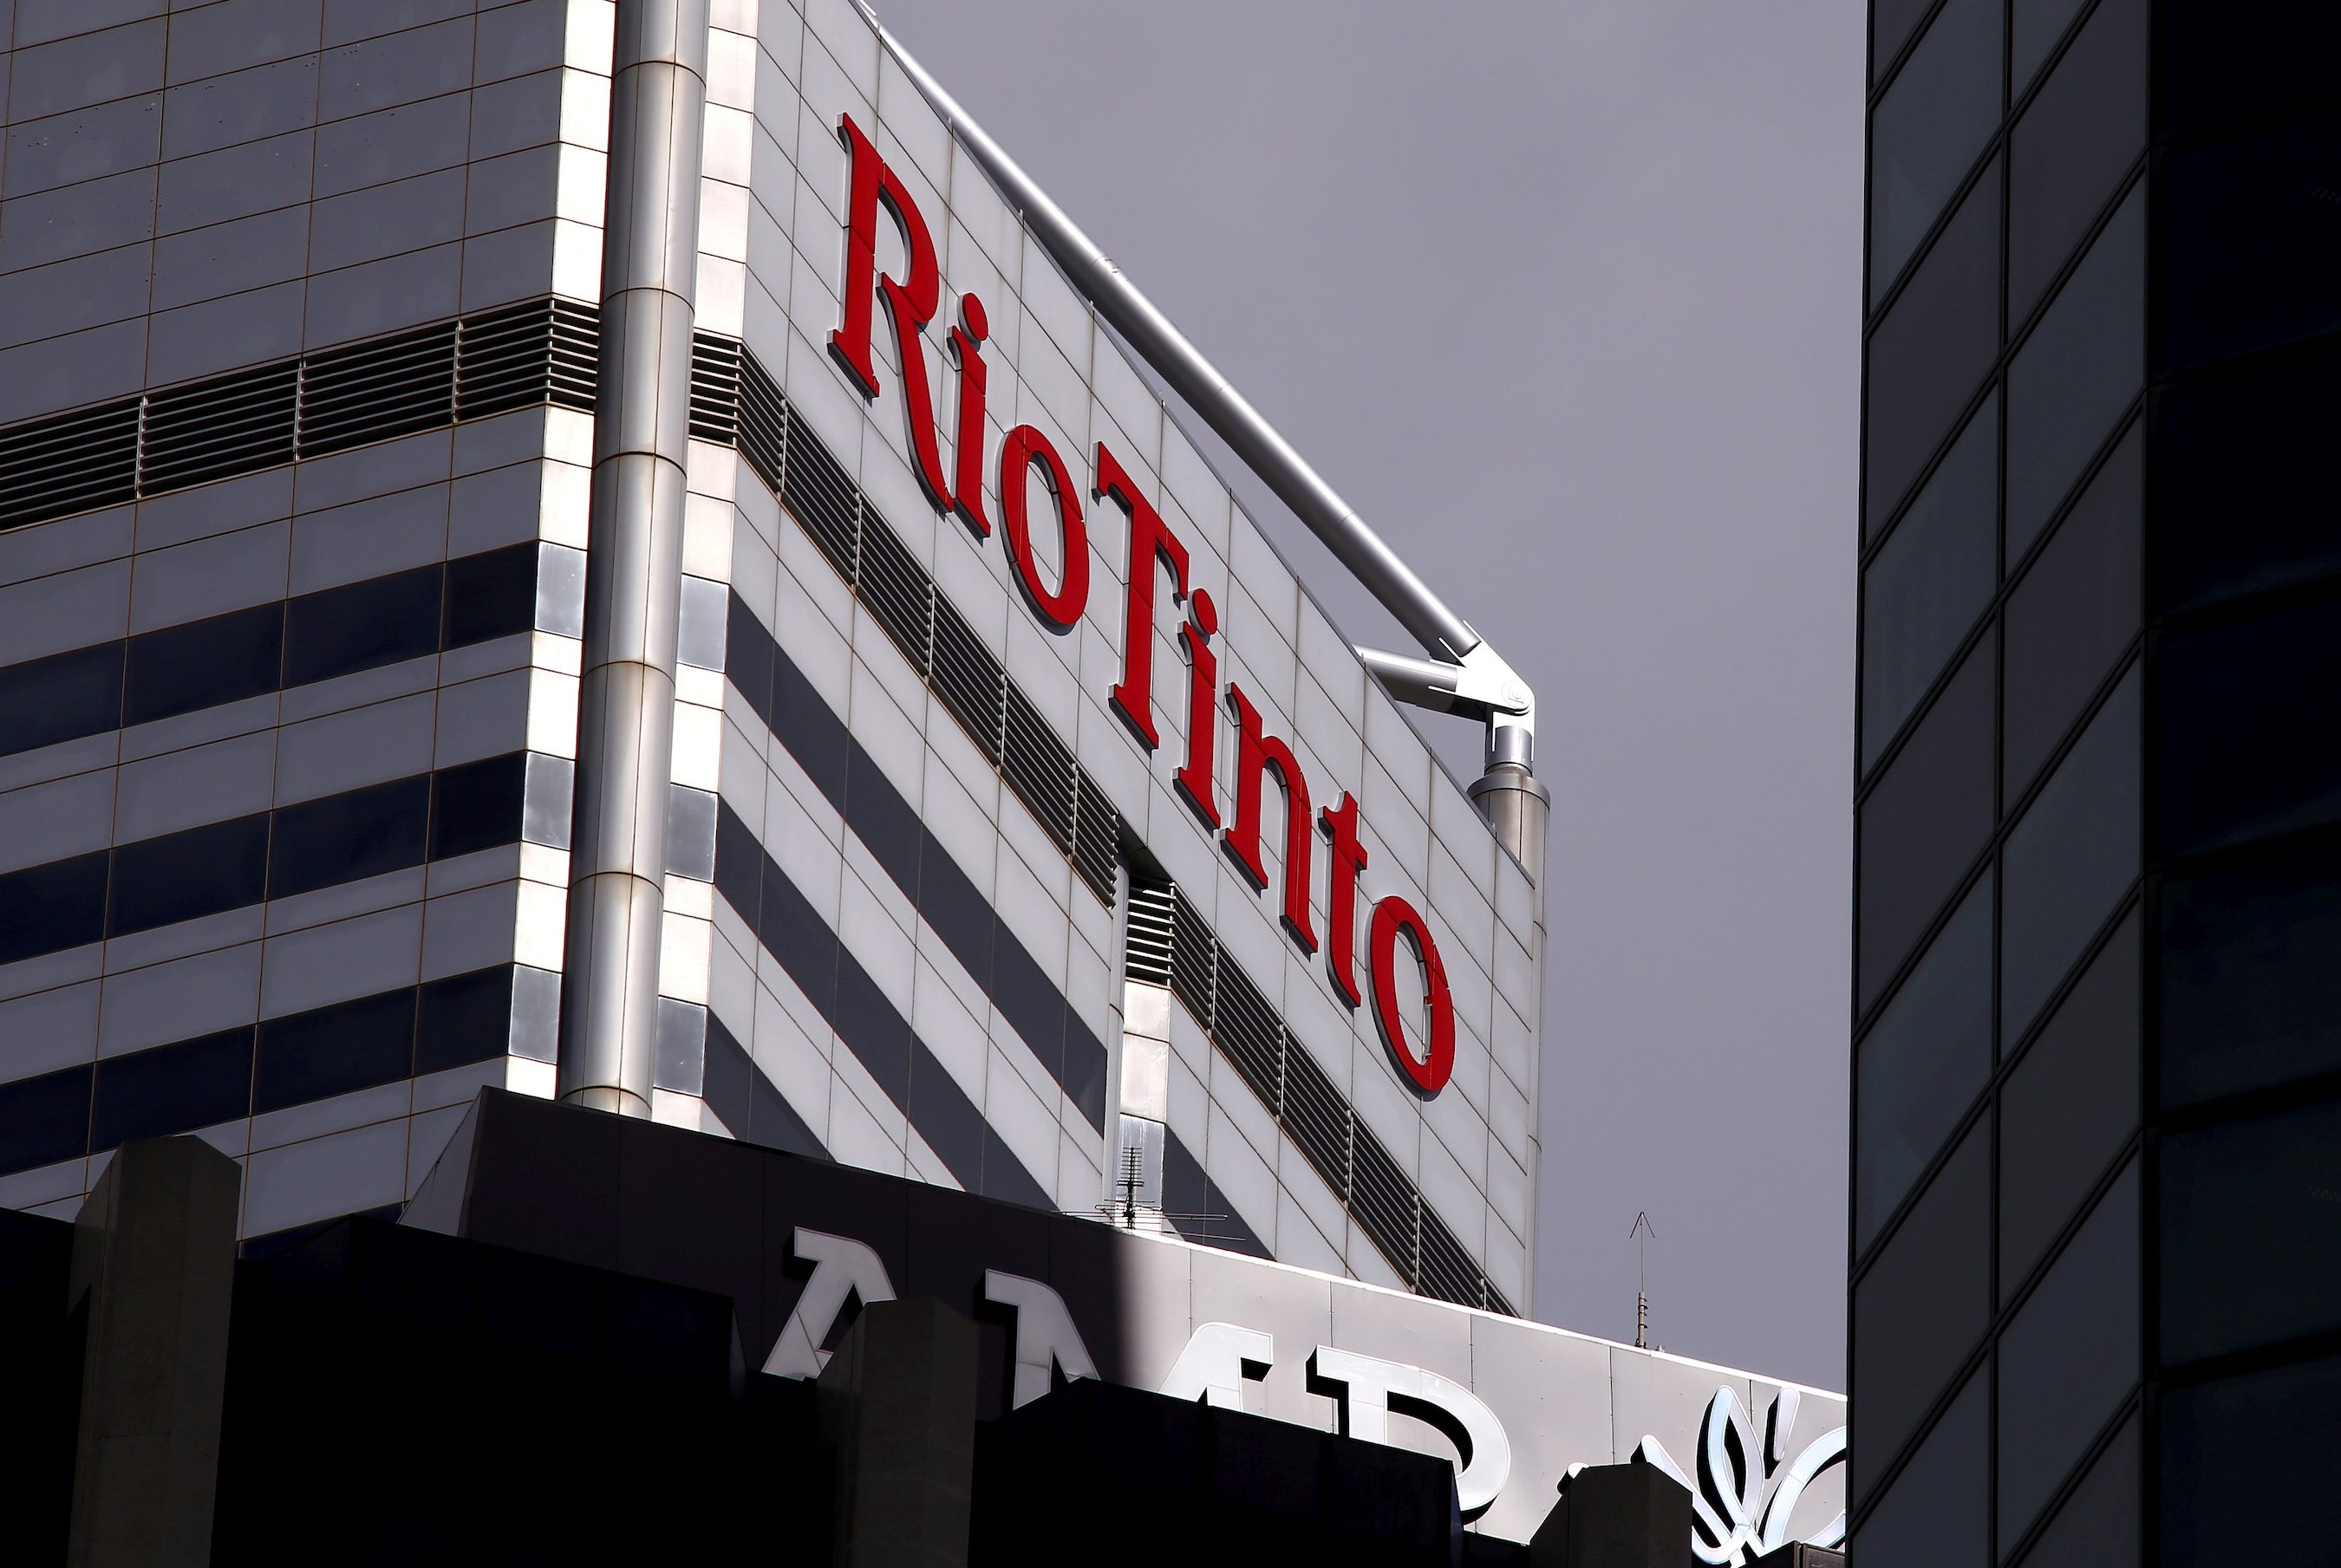 Rio Tinto sees soft 2022 iron ore shipments on labor issues, project delays